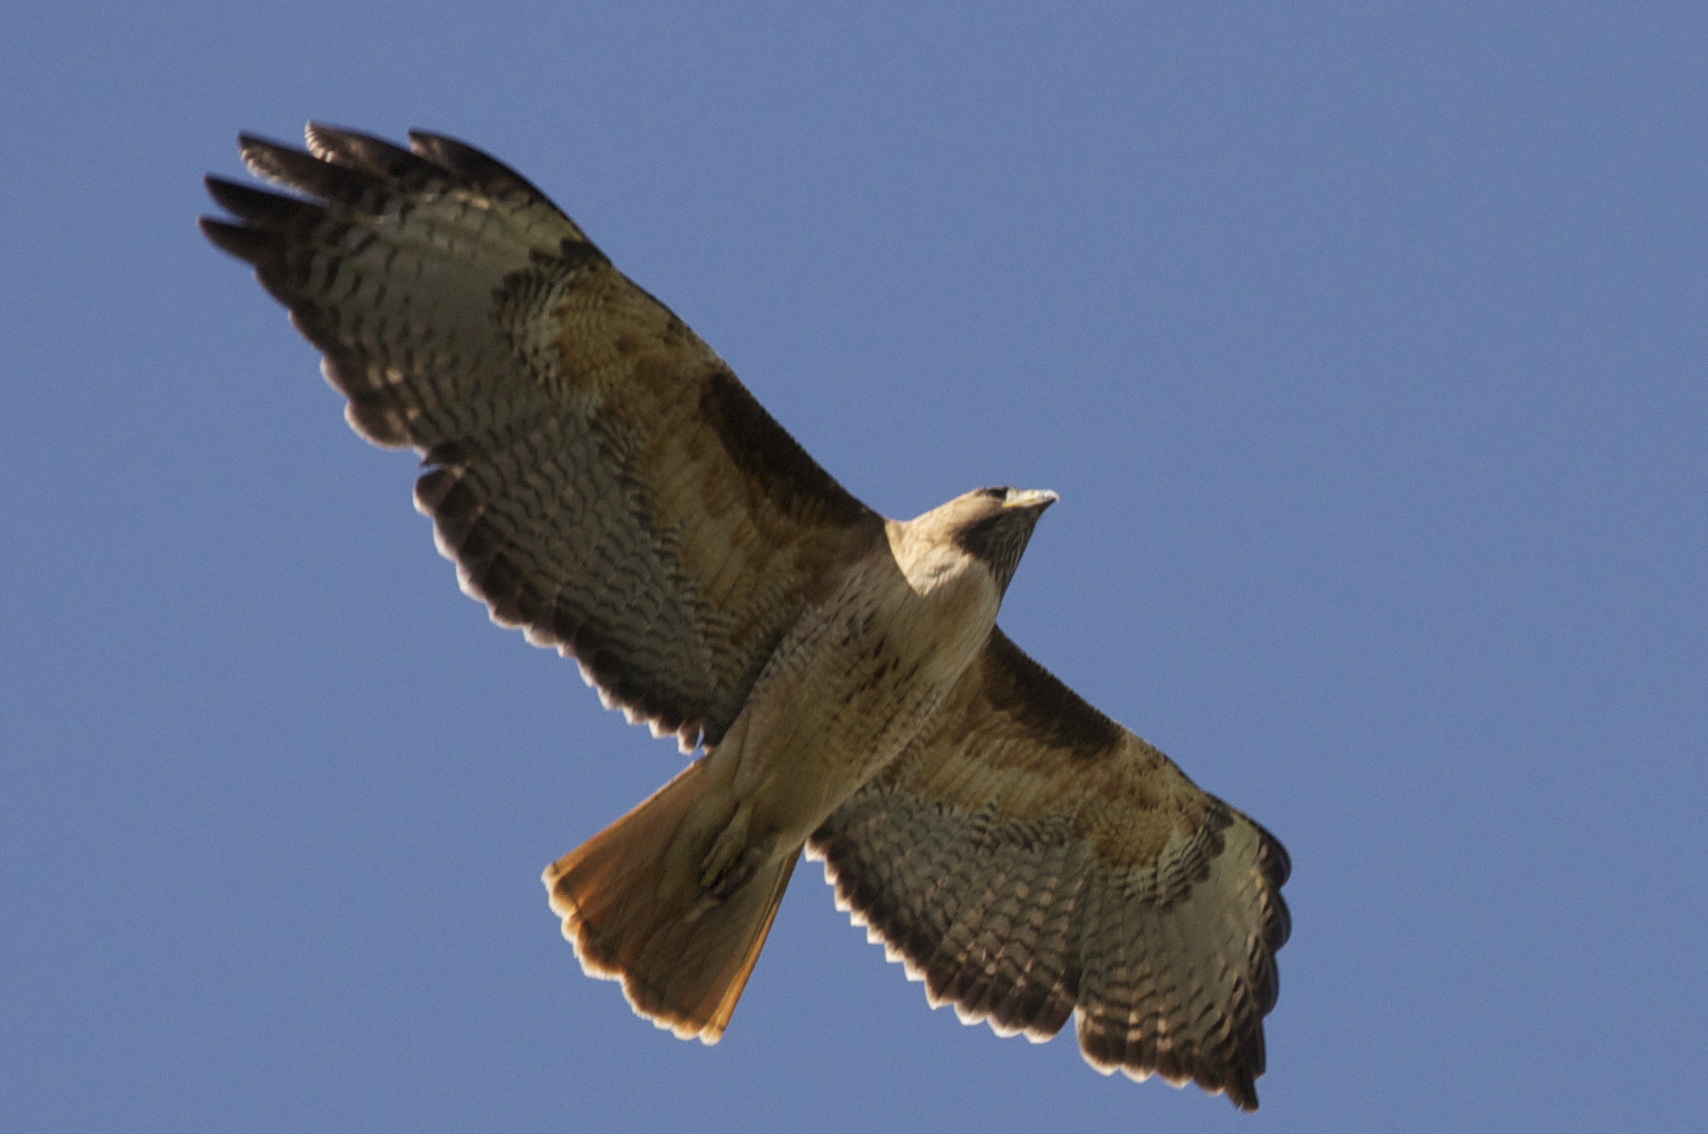 an adult hawk soaring in the sky over the ground